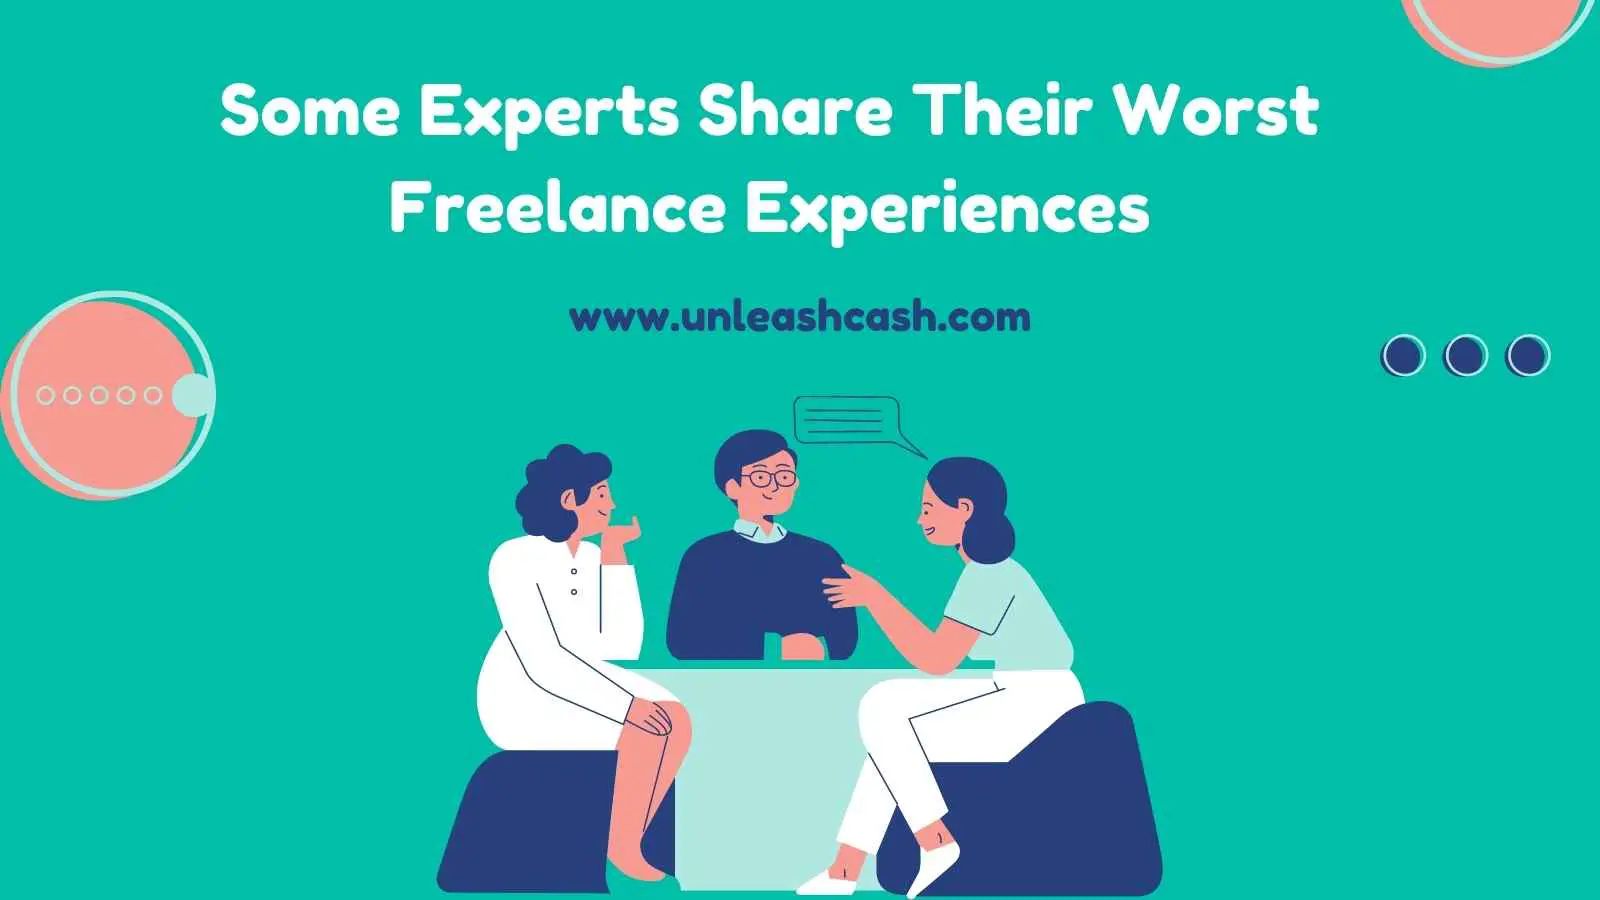 Some Experts Share Their Worst Freelance Experiences